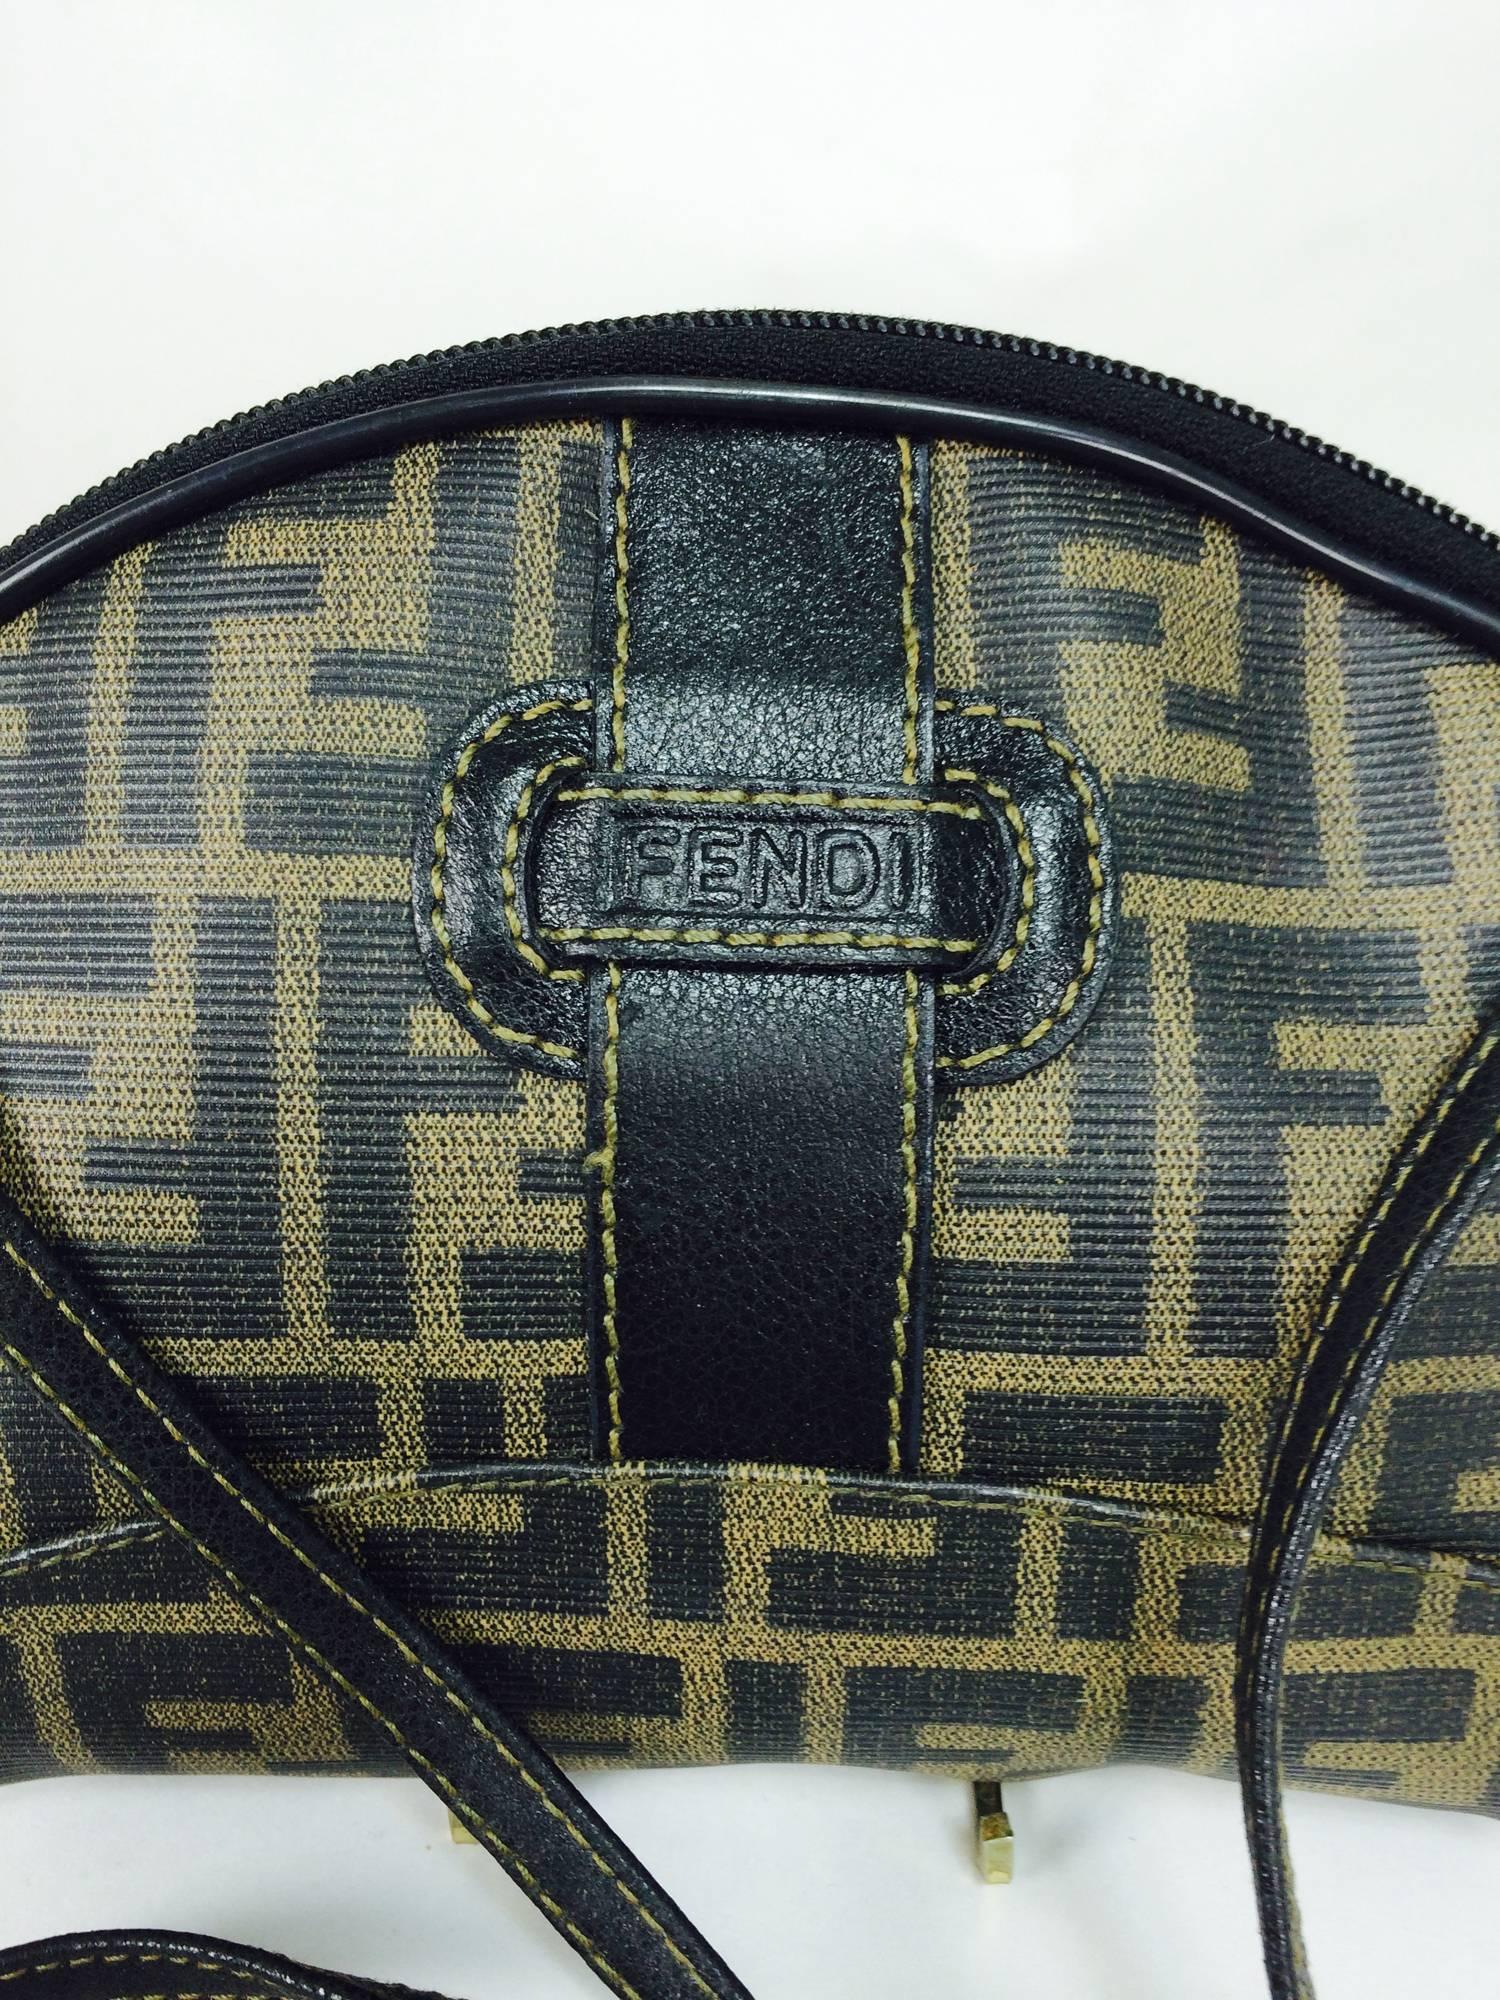 Fendi logo canvas cross body small hand bag 1980s...Classic Fendi logo canvas bag with long thin knotted cross body strap...Zipper top, with a single open compartment inside...Excellent condition.
Measurements are:
8 1/2